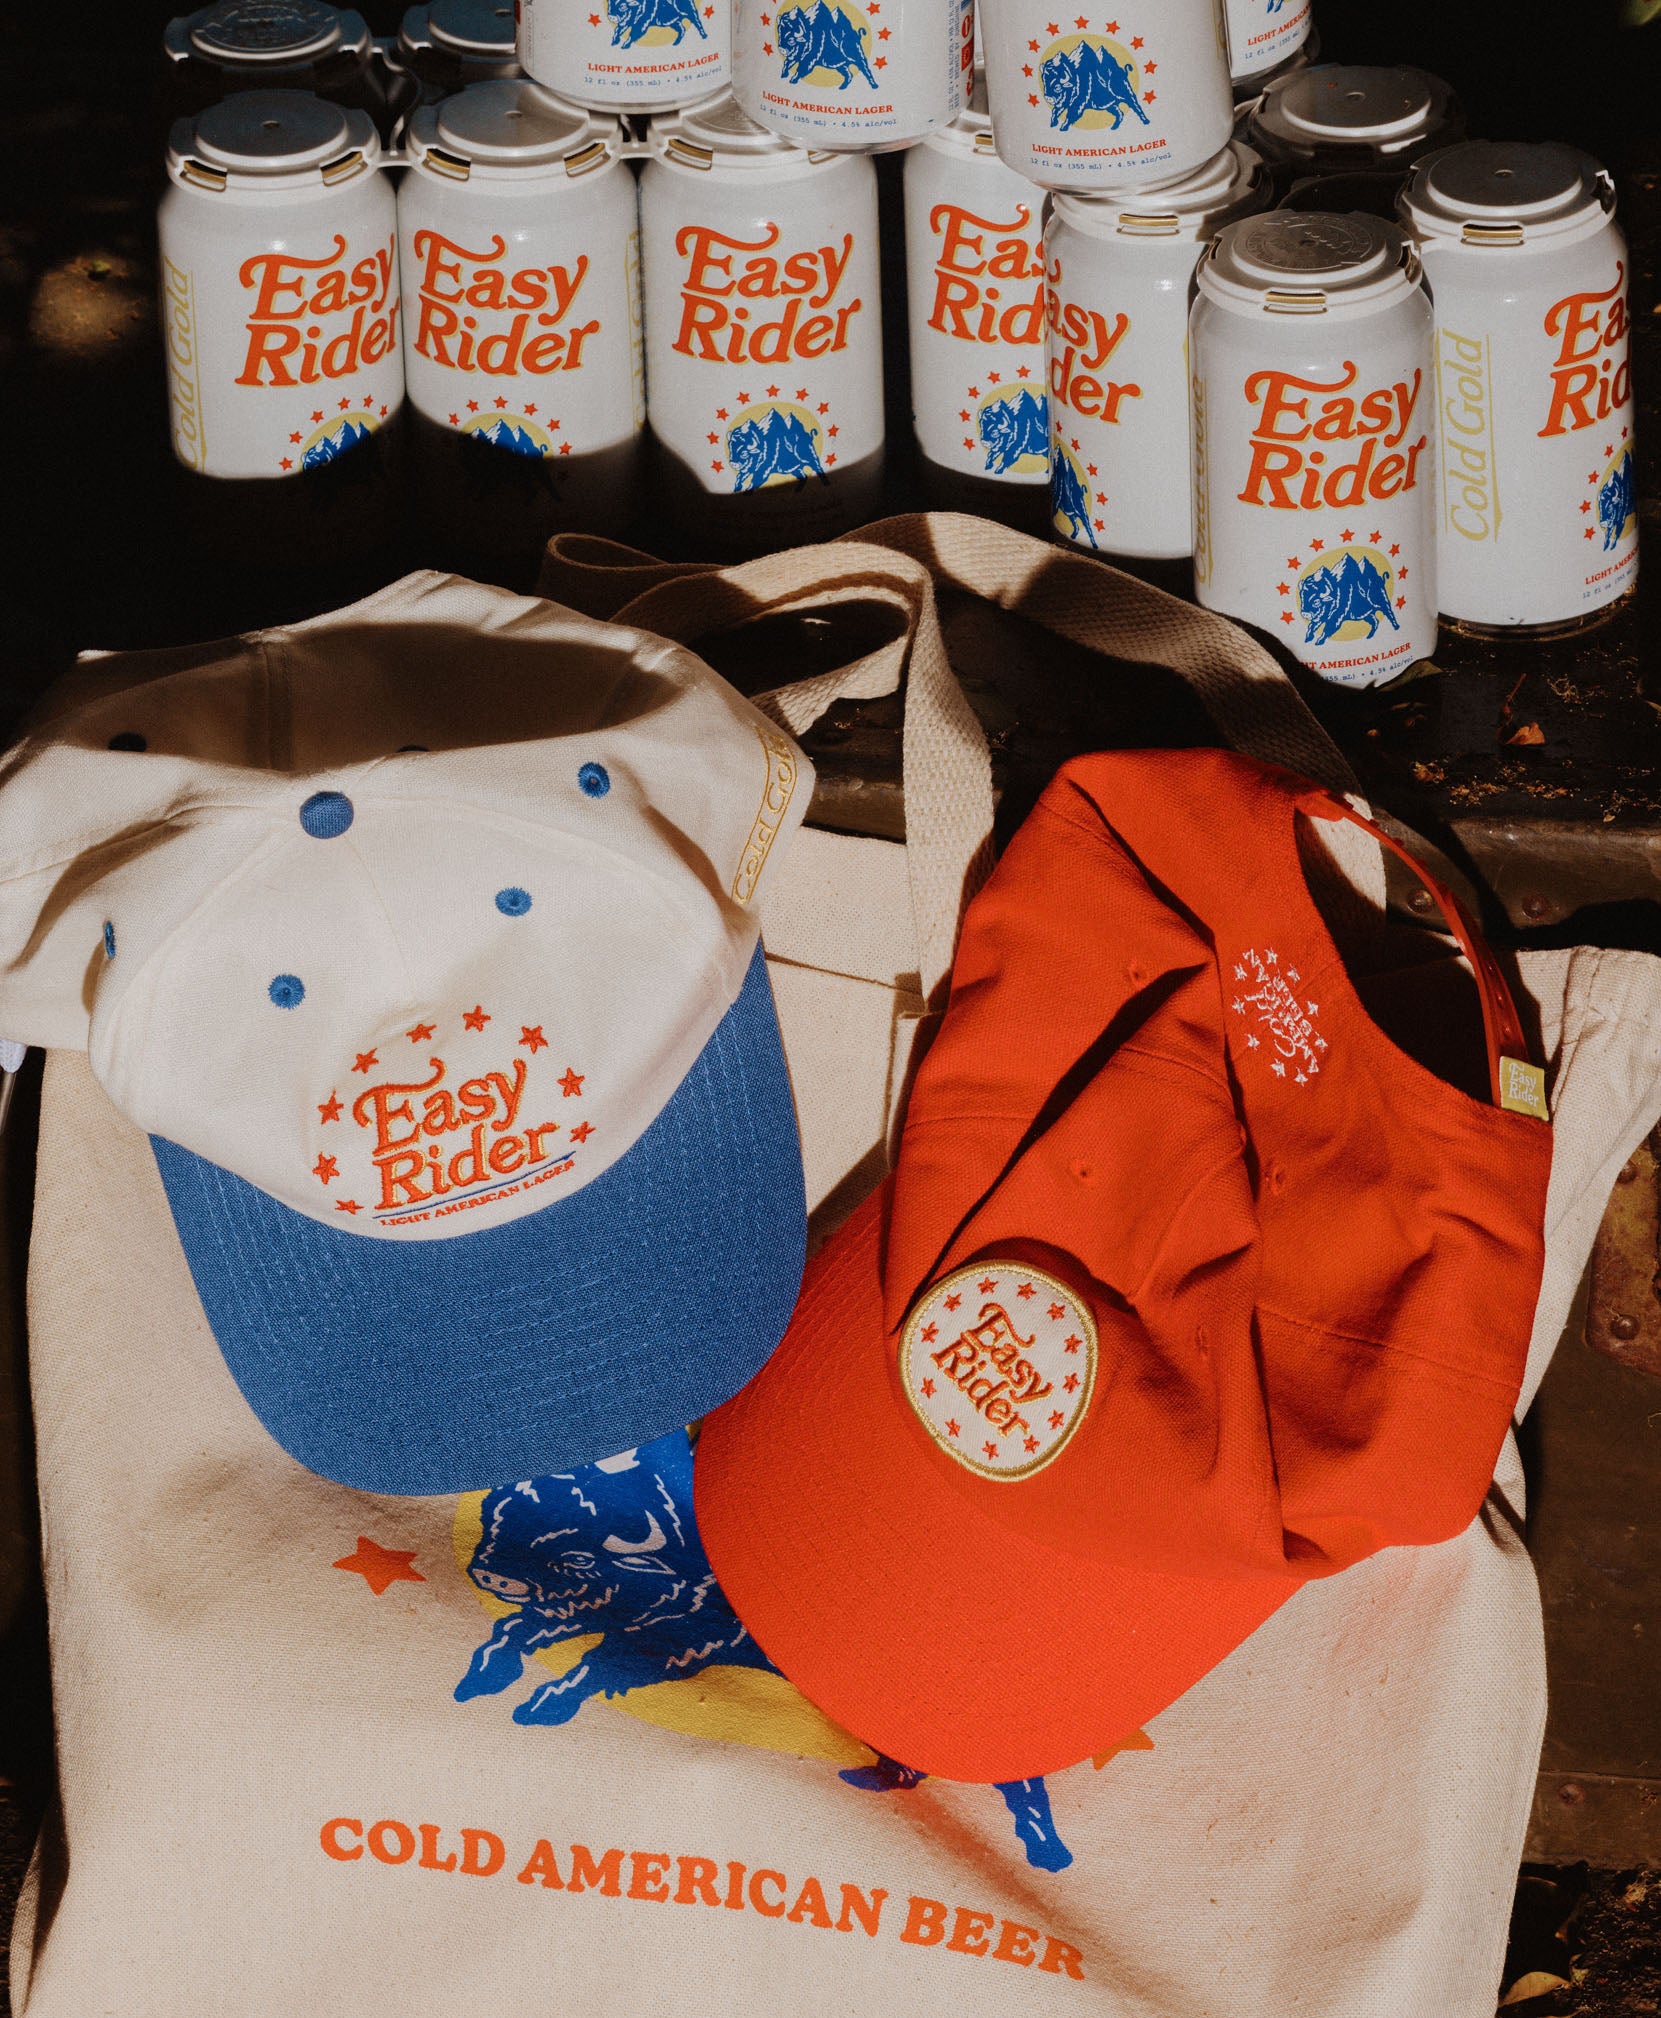 Easy Rider hats, tote bags, and six-packs